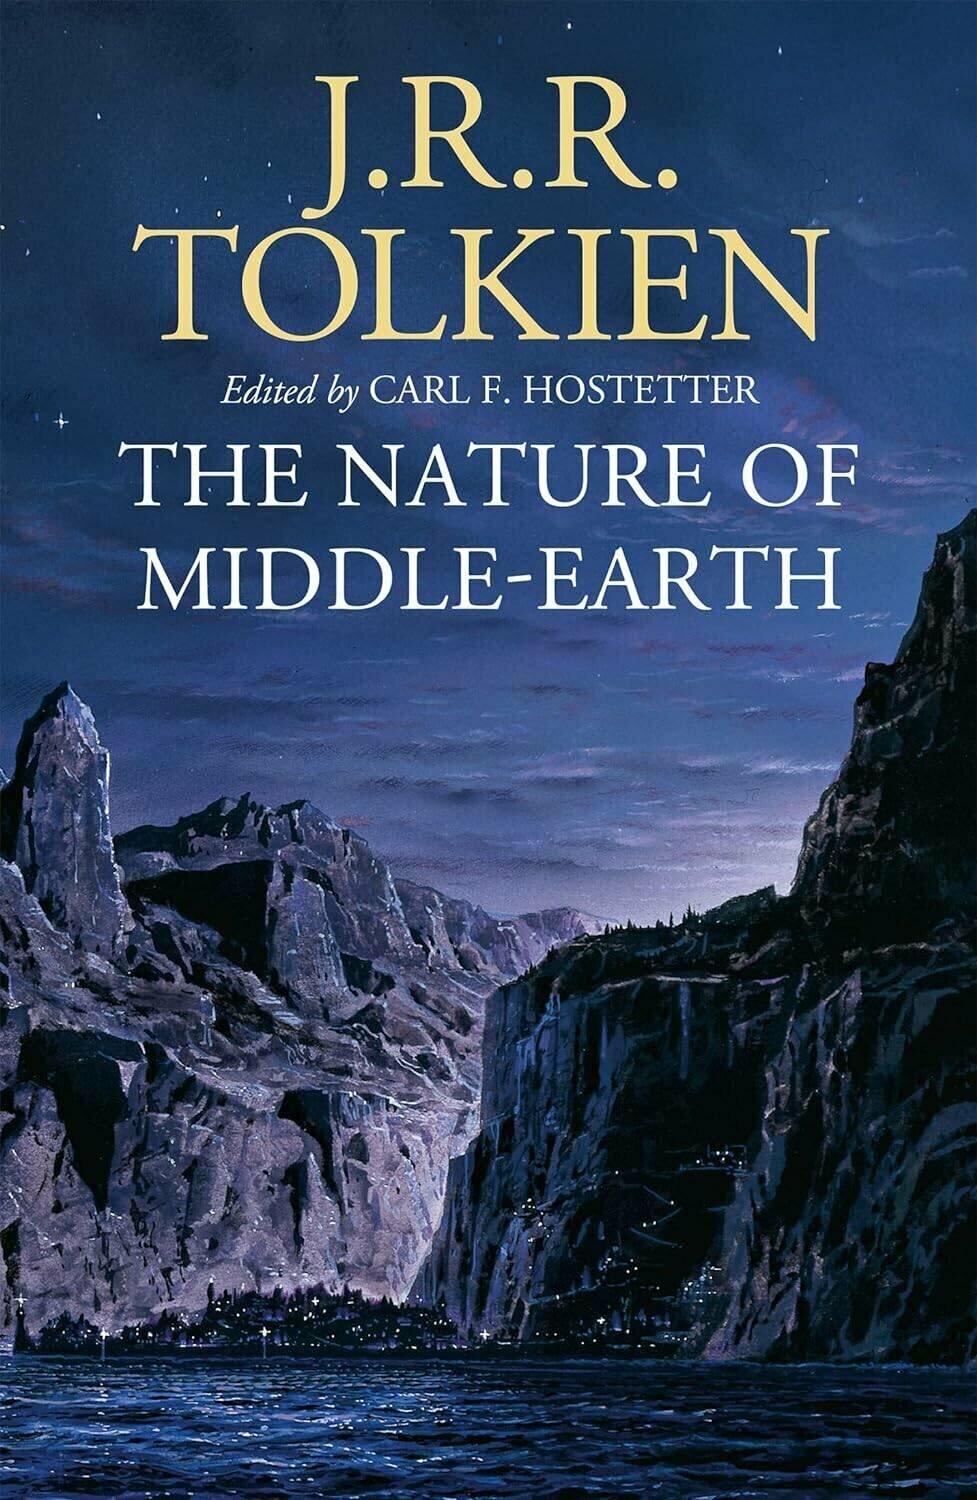 J.R.R Tolkien. The nature of Middle Earth (J. R. R Tolkien) Природа Средиземья (Дж. Р. Толкин) /Книги на английском языке